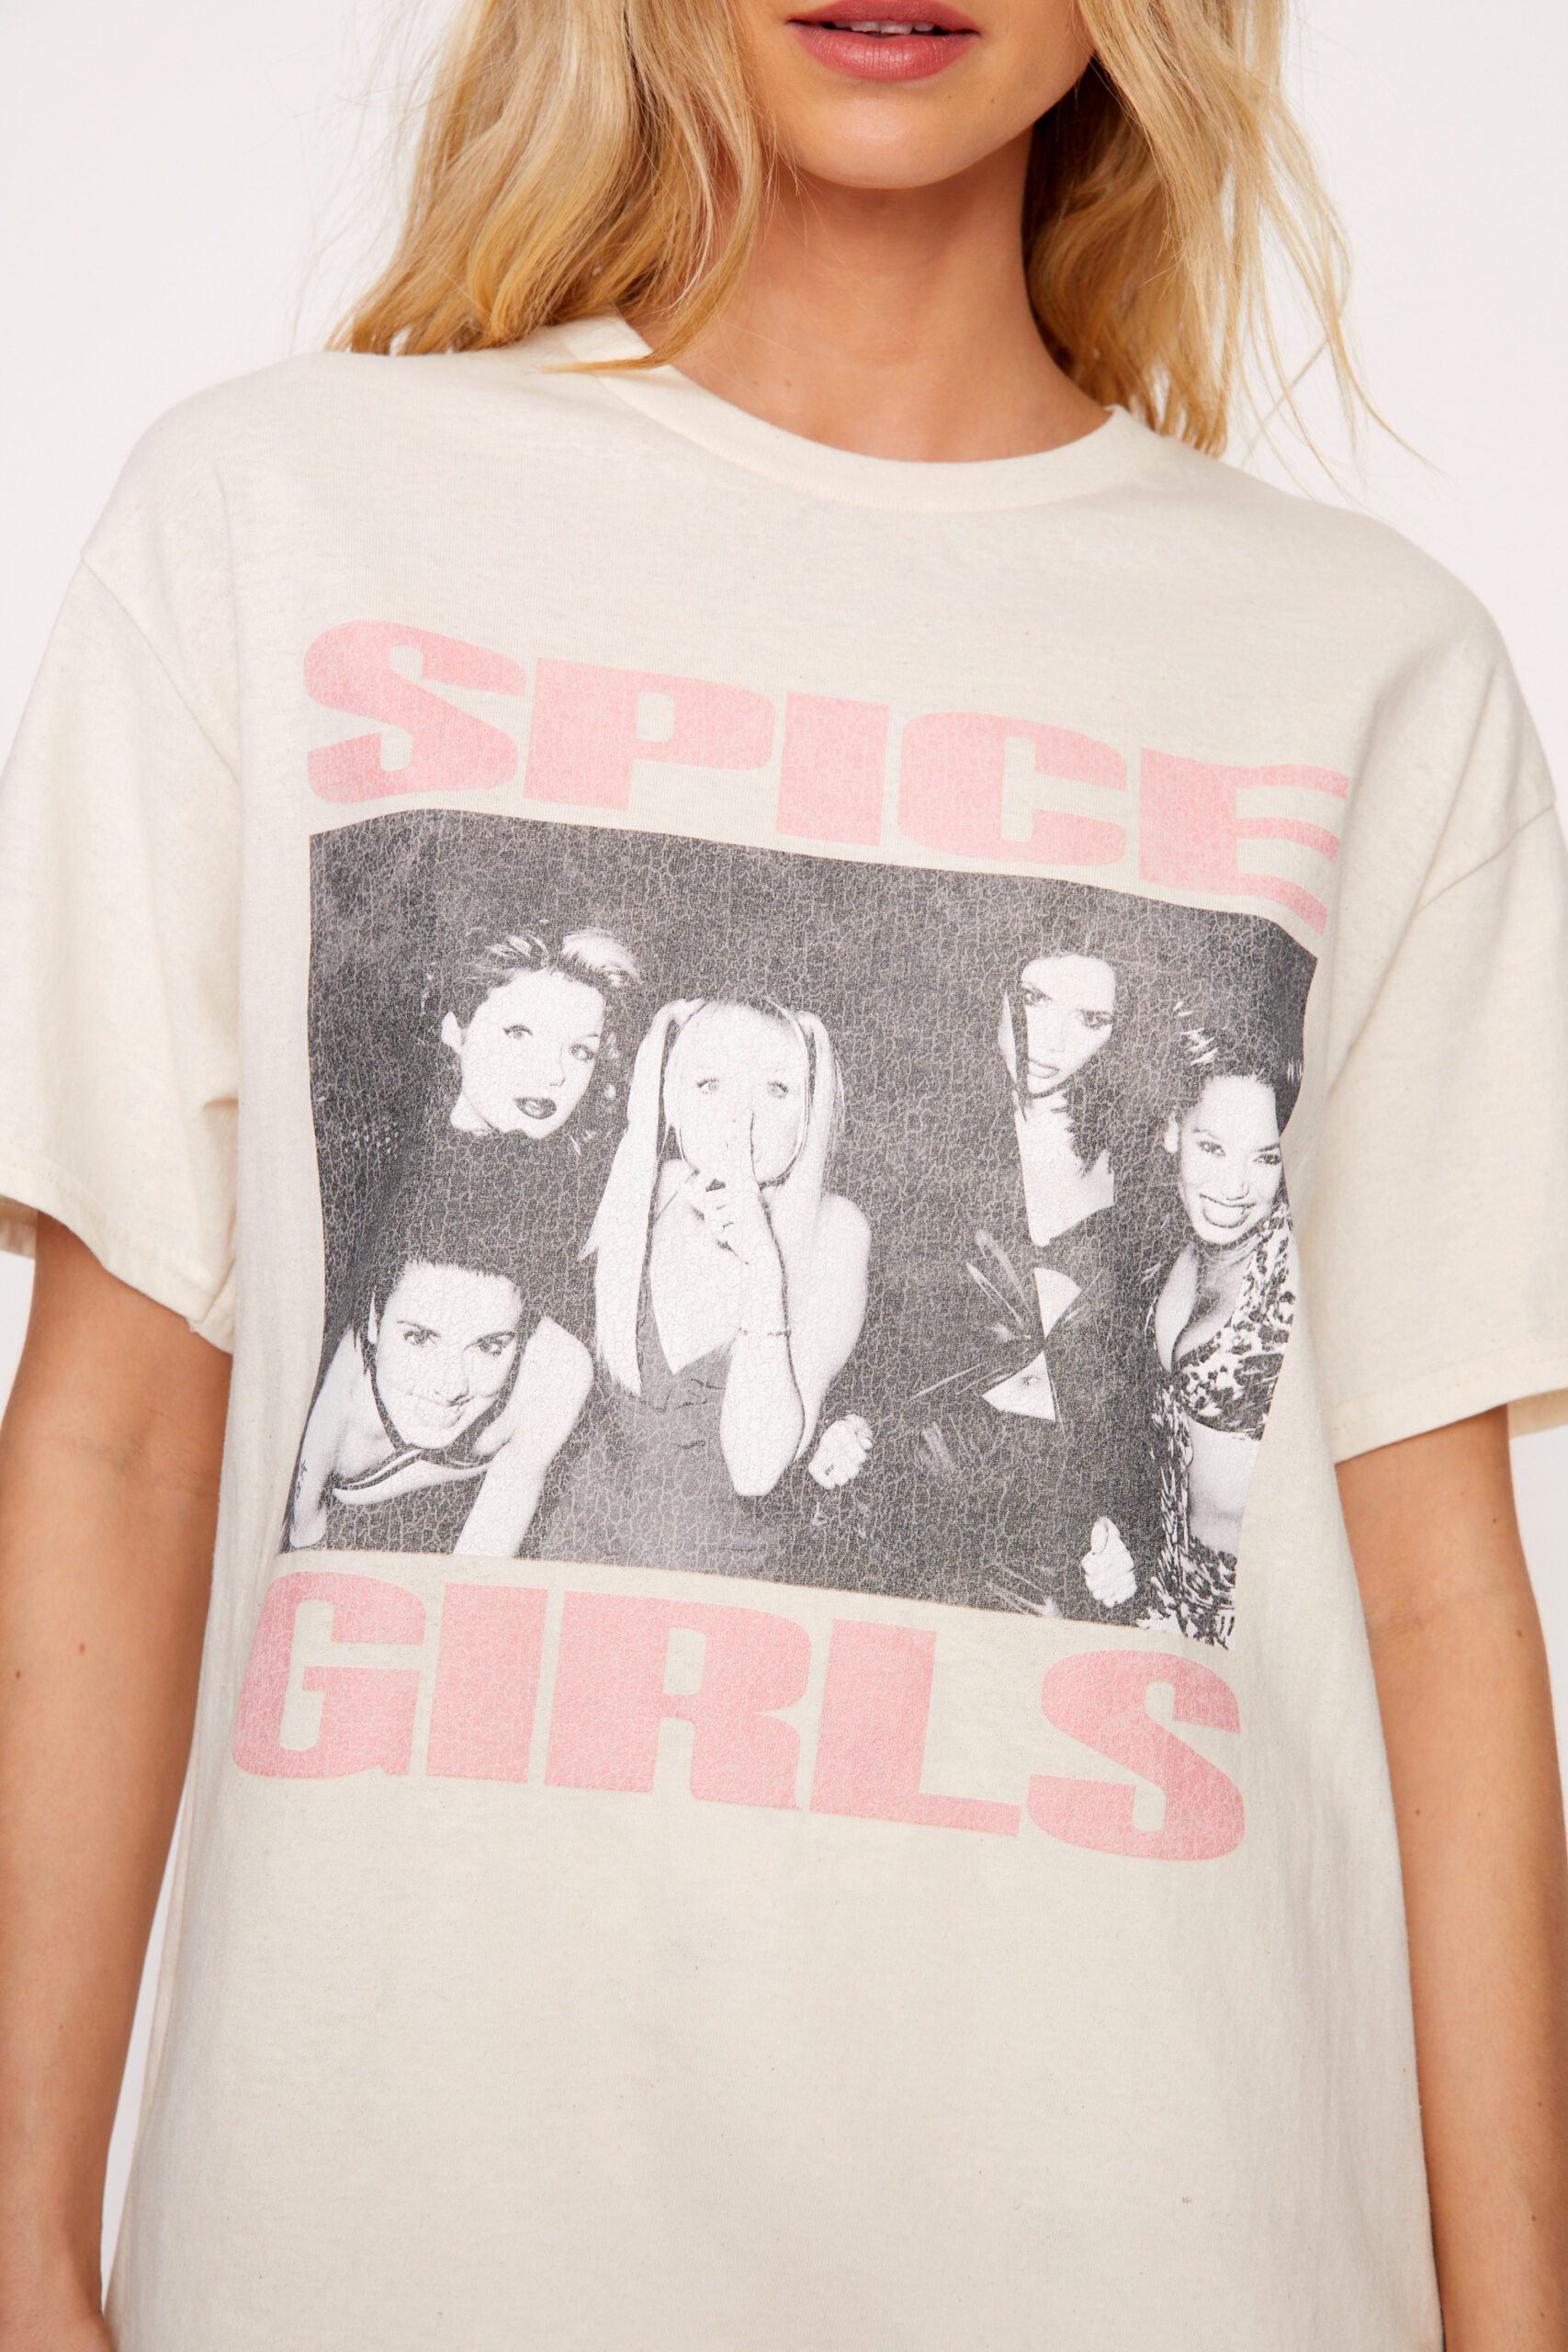 Spice Girls Oversized Graphic Band T-Shirt